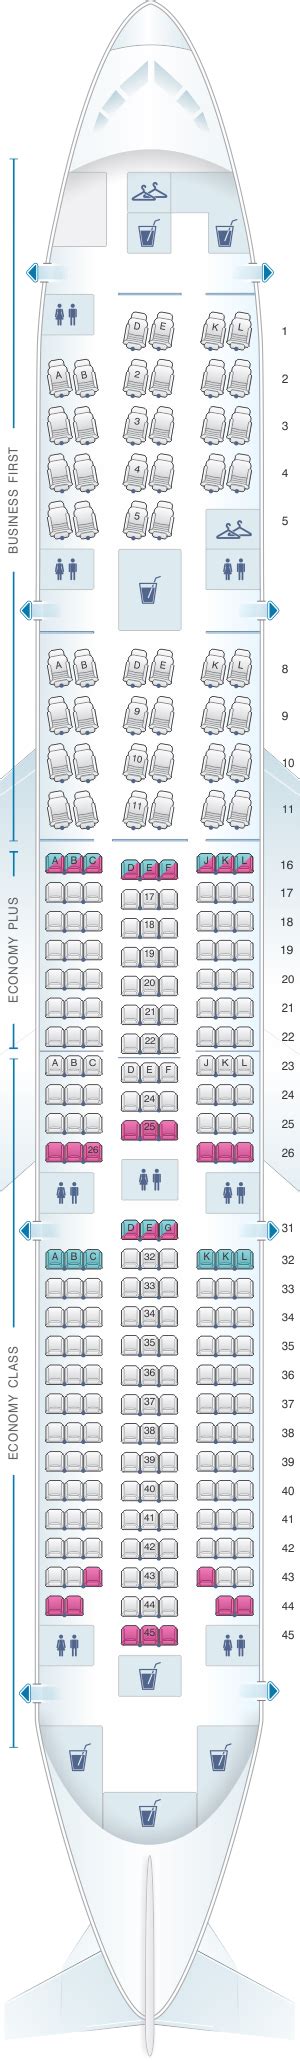 Seat Map United Boeing 777-200 (777) v3. Airplane Boeing 777-200 (777) v3 United with 3 classes and 364 seats on board. Use airplane seat map to find which ones are more comfortable and which should be avoided. Tap the seat on the map to see the details.